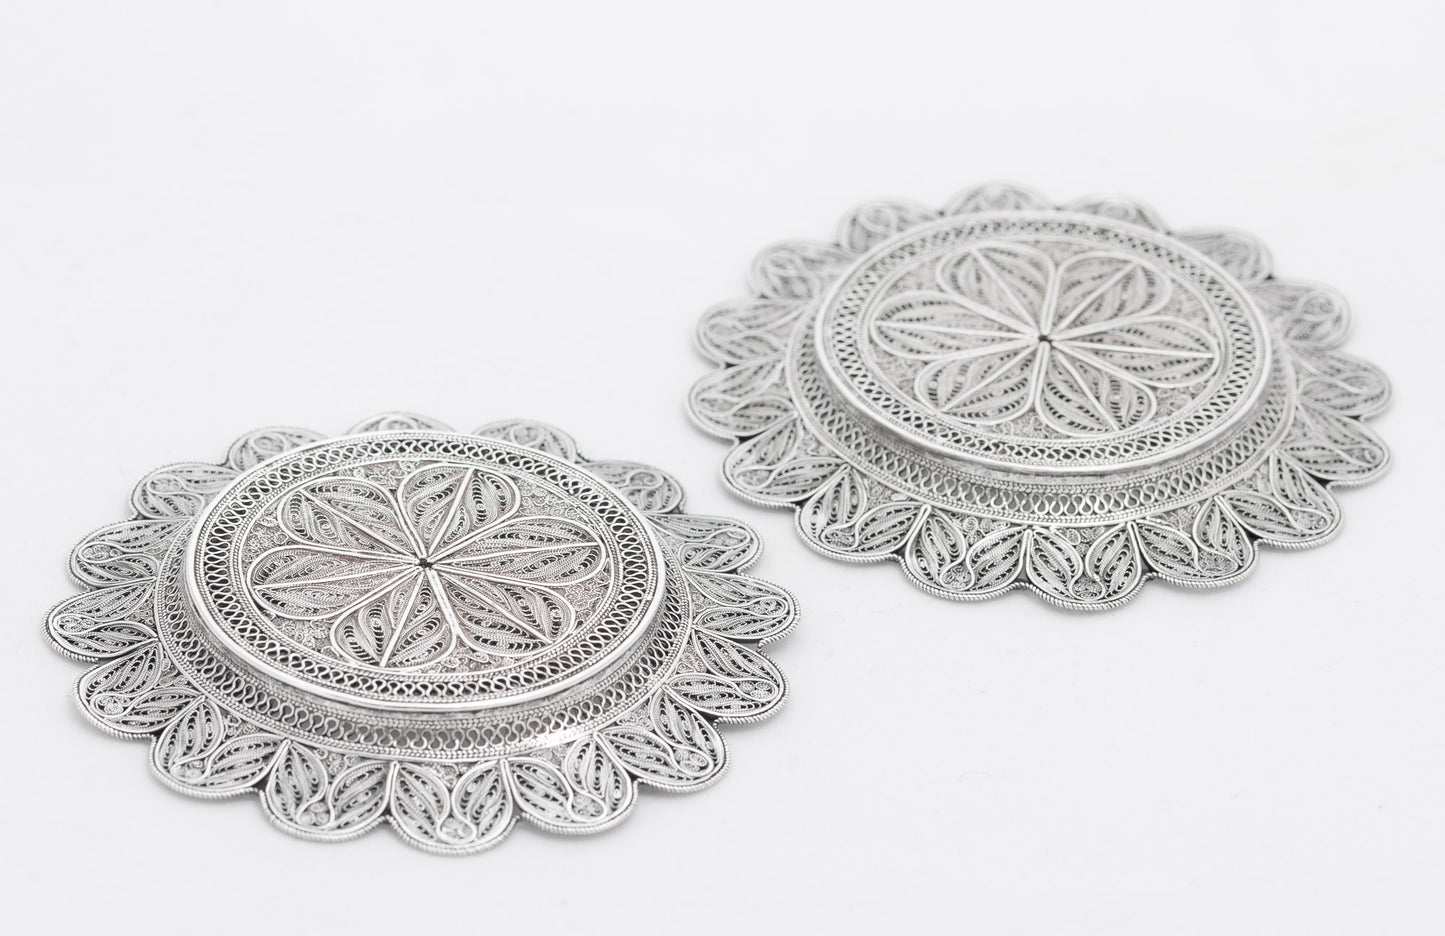 Pair Antique Fine Quality Silver Filigree Coasters/Dishes Turkish/Middle Eastern c1920 (3096)